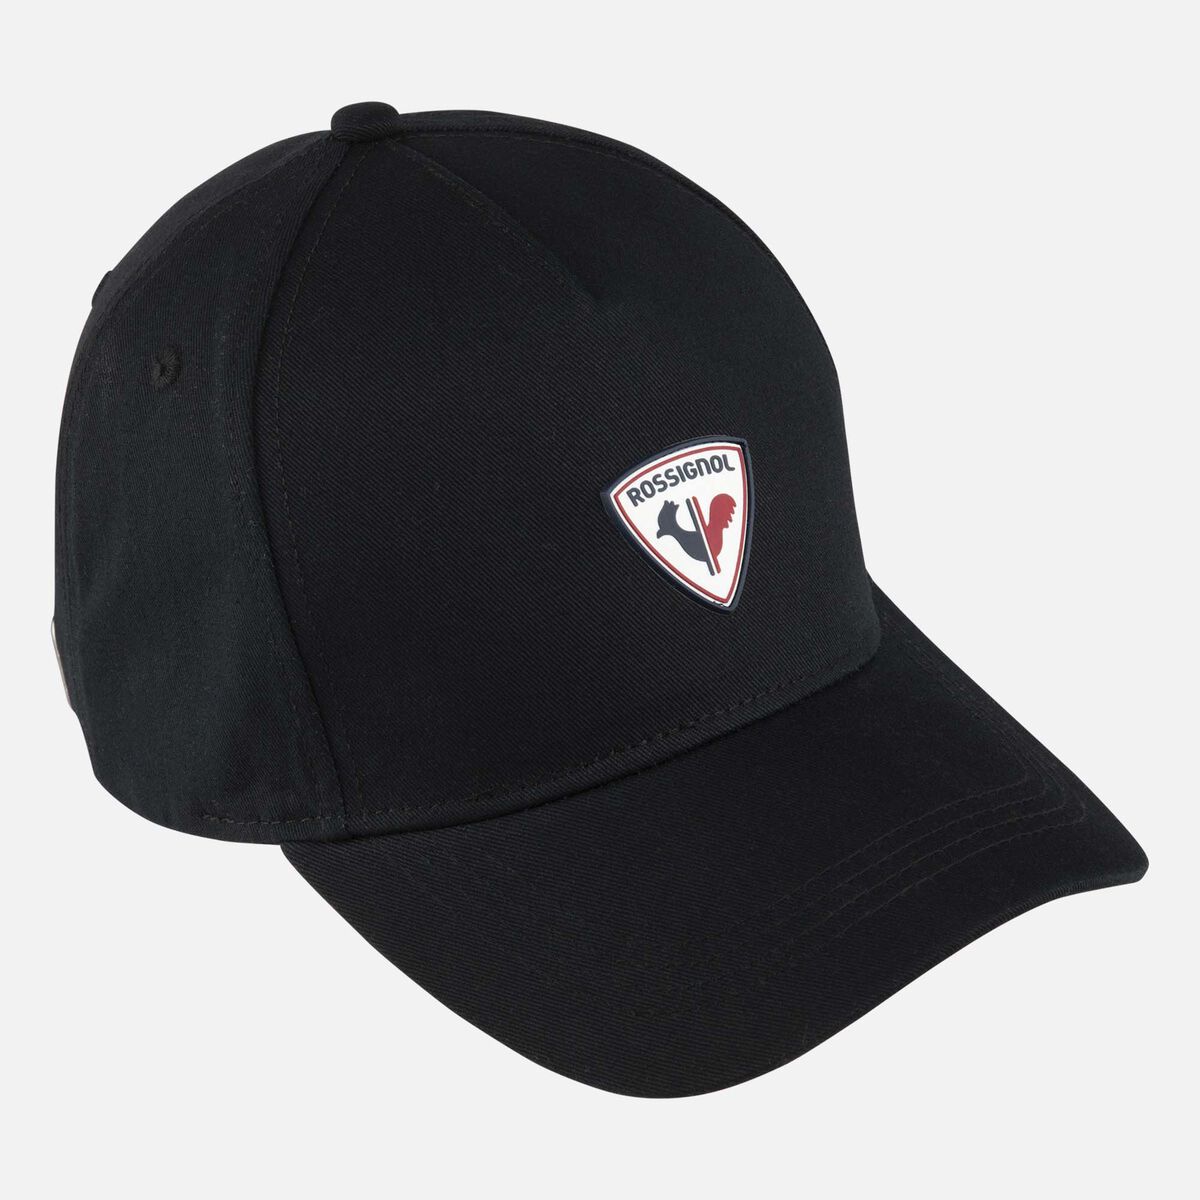 Corporate Rooster Cap